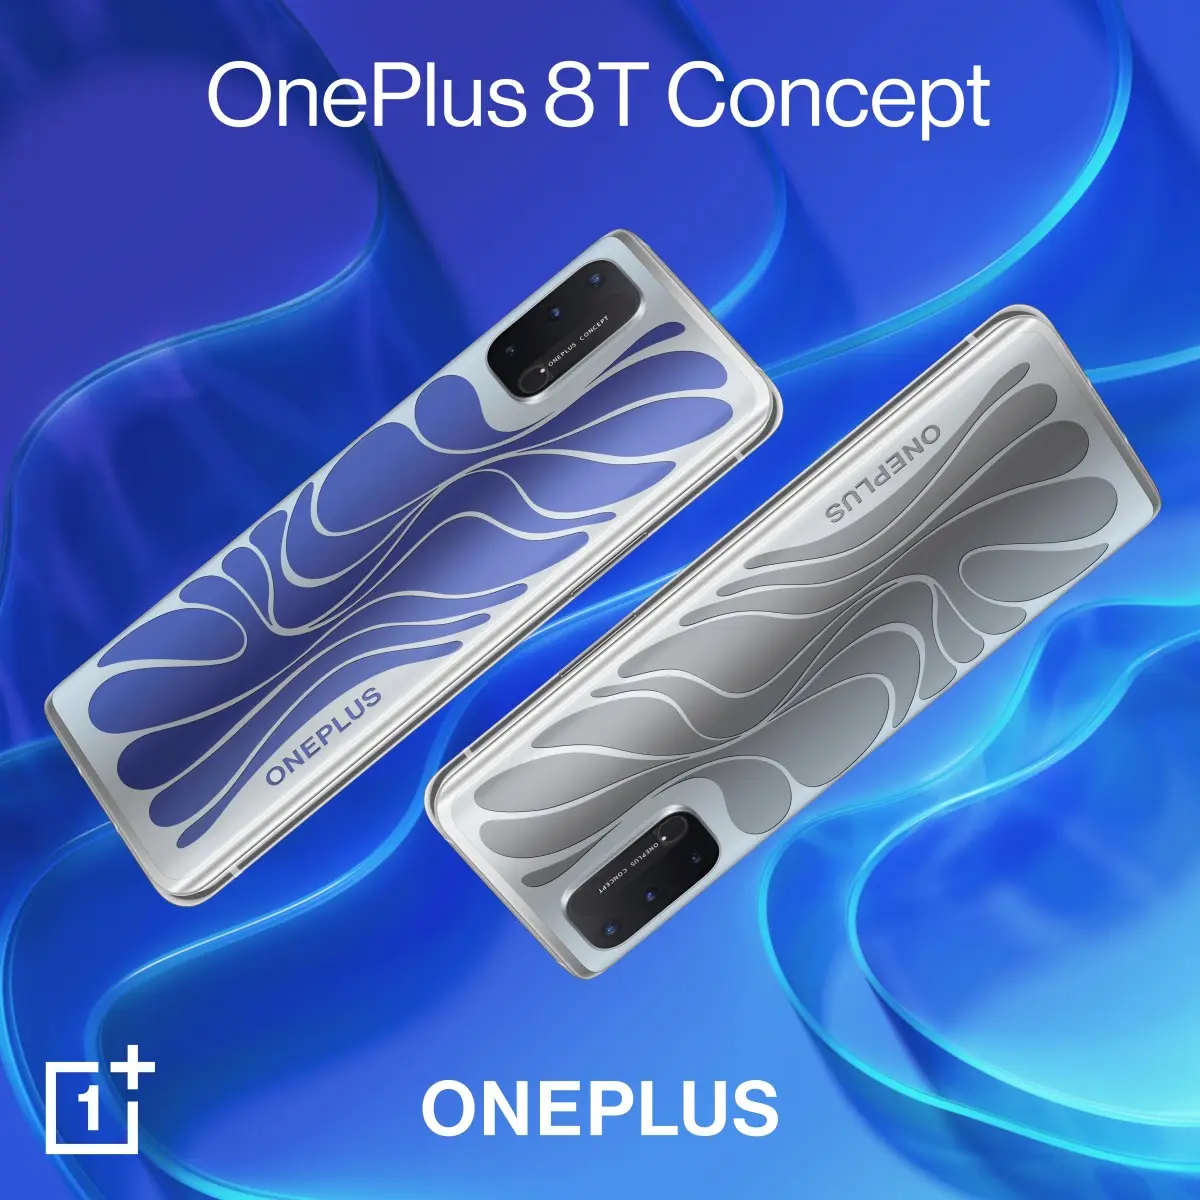 One Plus hace oficial su concepto OnePlus 8T